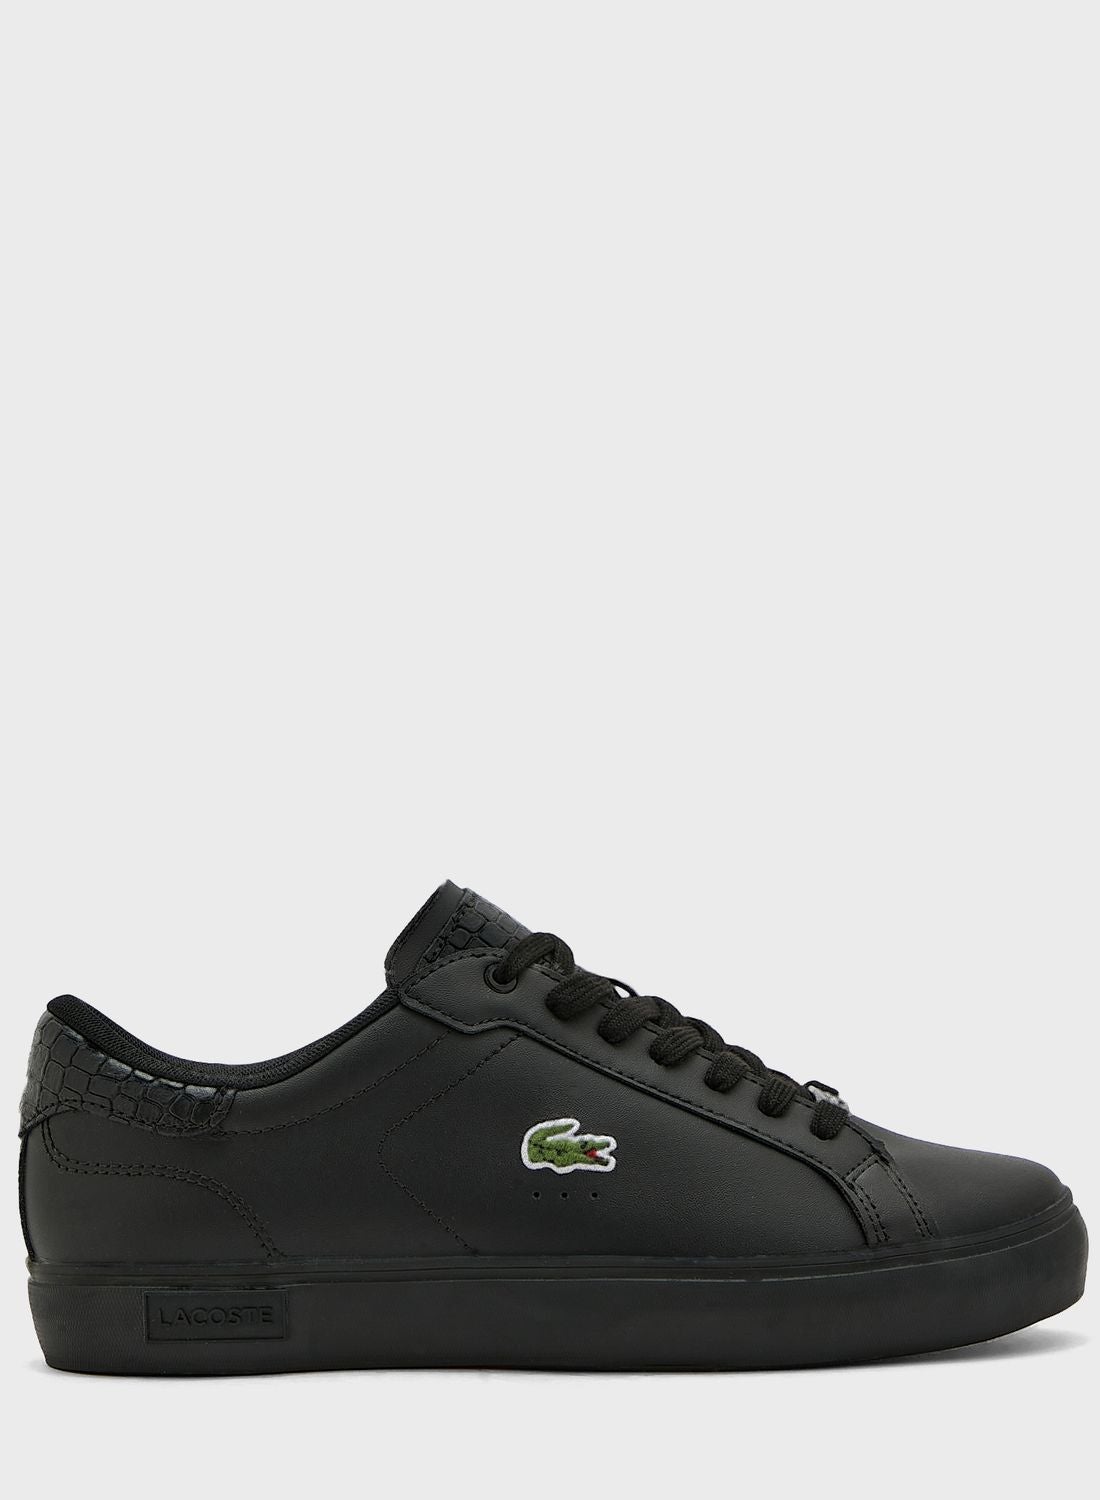 LACOSTE Powercourt Low Top Sneakers